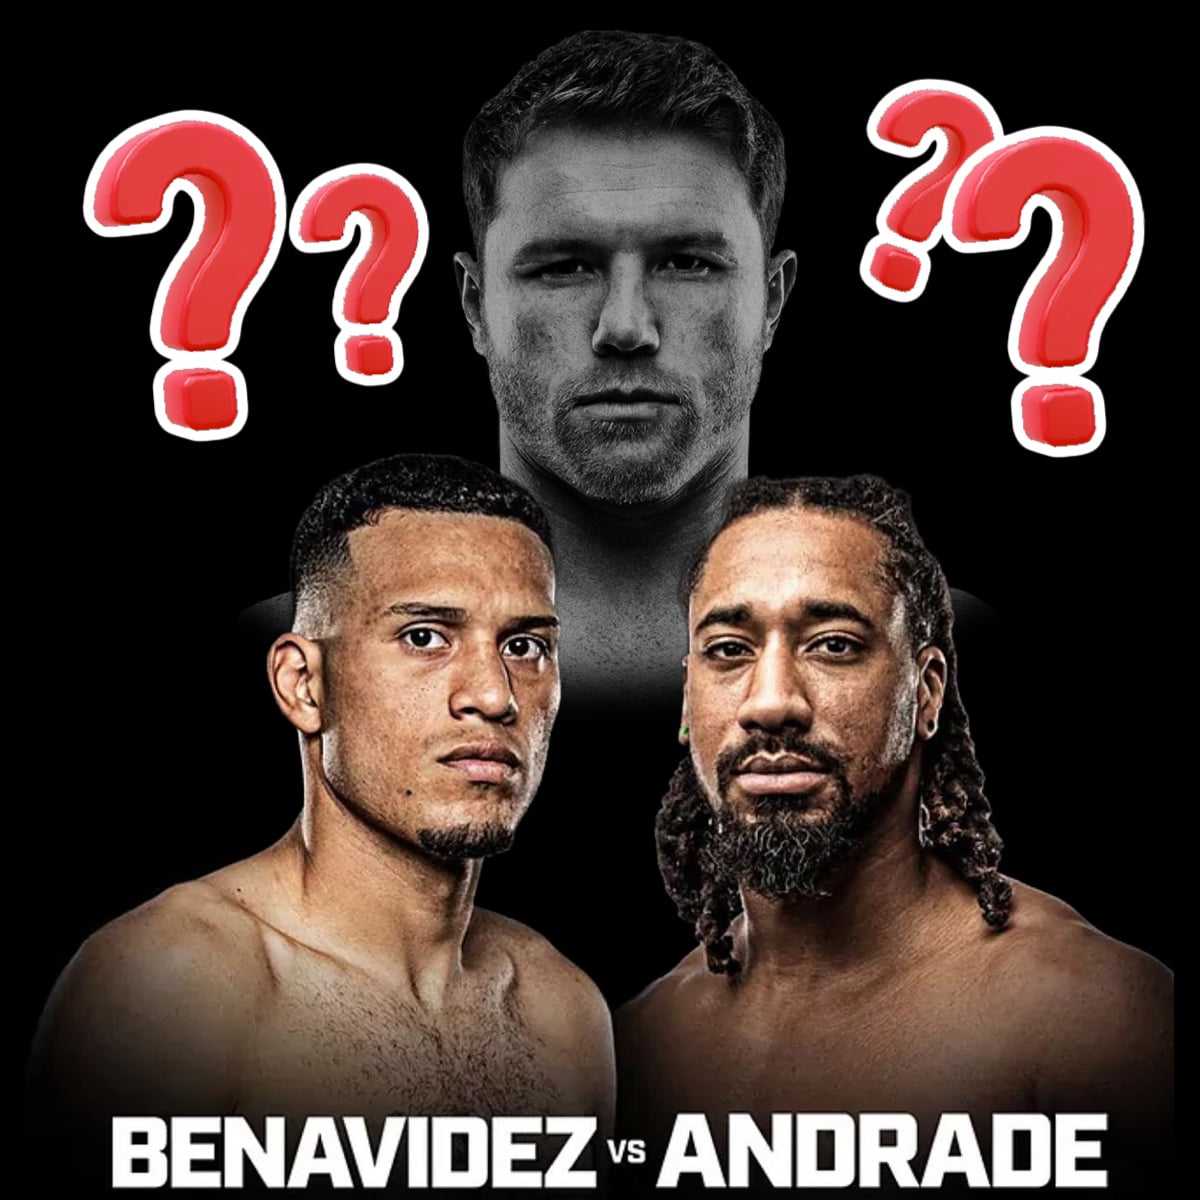 Canelo Next Fight with potential contenders David Benavidez and Demetrius Andrade, hinting at the next big boxing matchup